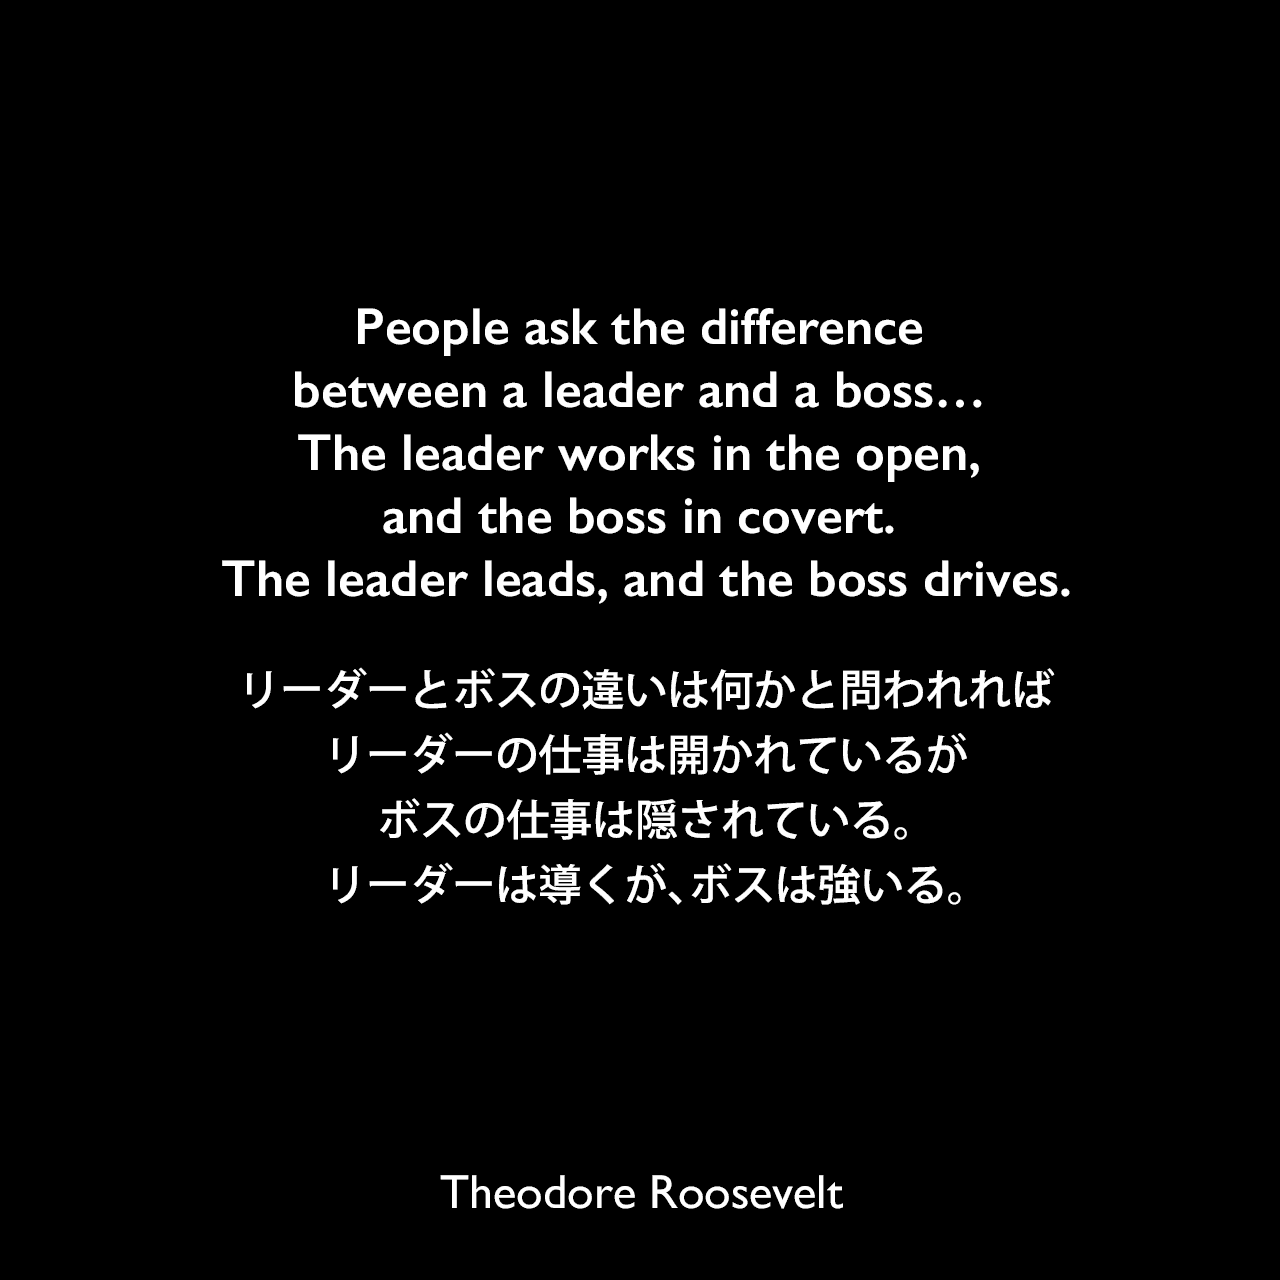 People ask the difference between a leader and a boss… The leader works in the open, and the boss in covert. The leader leads, and the boss drives.リーダーとボスの違いは何かと問われれば、リーダーの仕事は開かれているが、ボスの仕事は隠されている。リーダーは導くが、ボスは強いる。Theodore Roosevelt